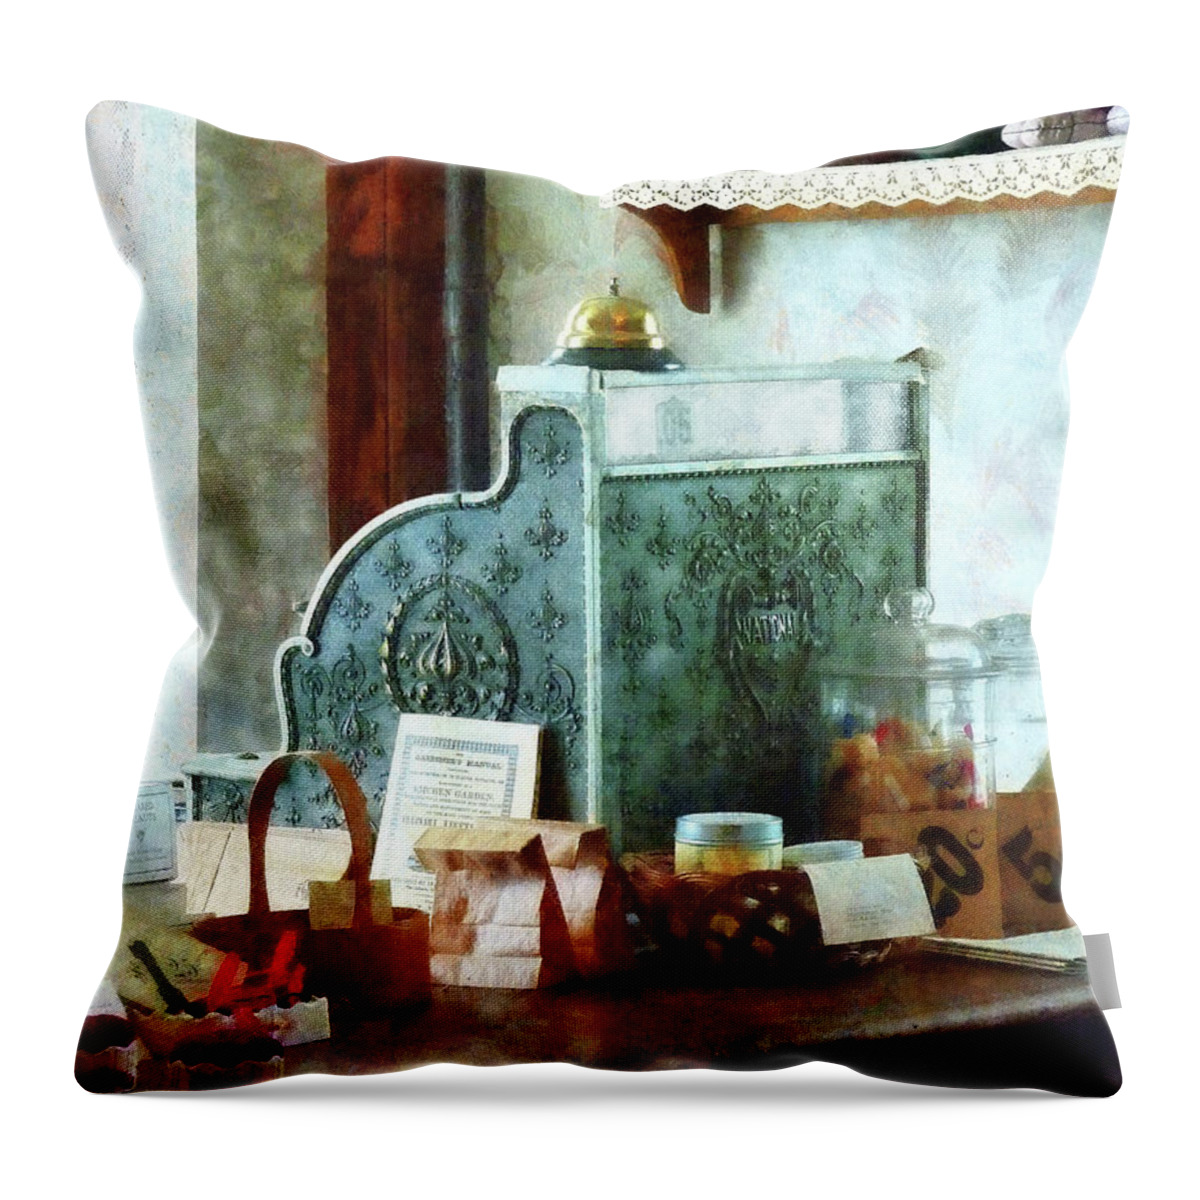 Cash Register Throw Pillow featuring the photograph Cash Register in General Store by Susan Savad